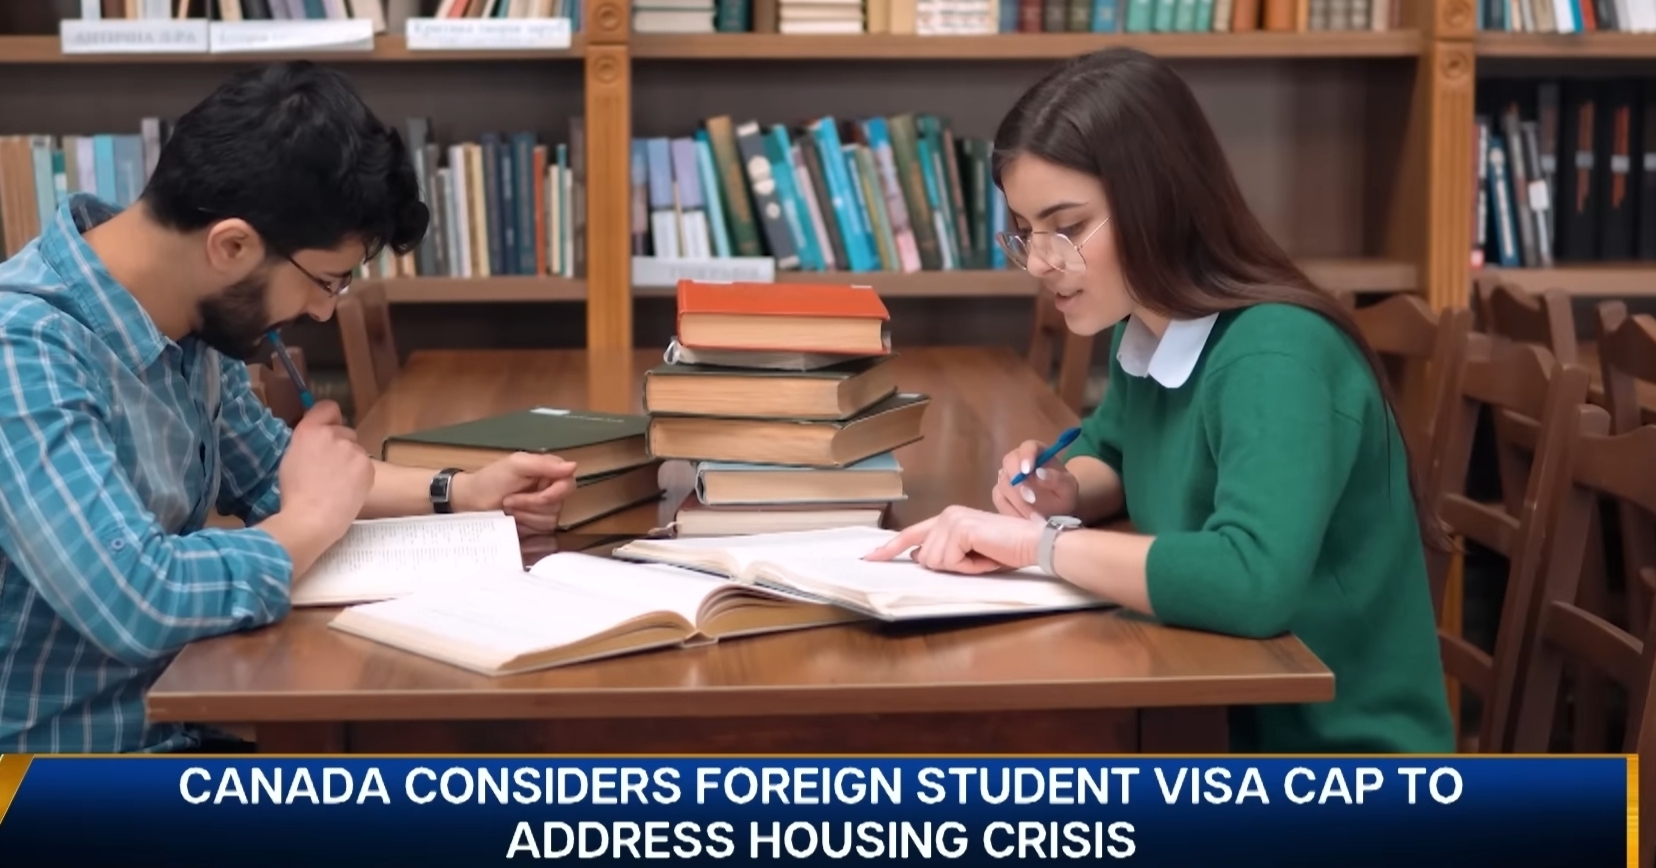 Why Canada is Considering a Visa Cap for Students?